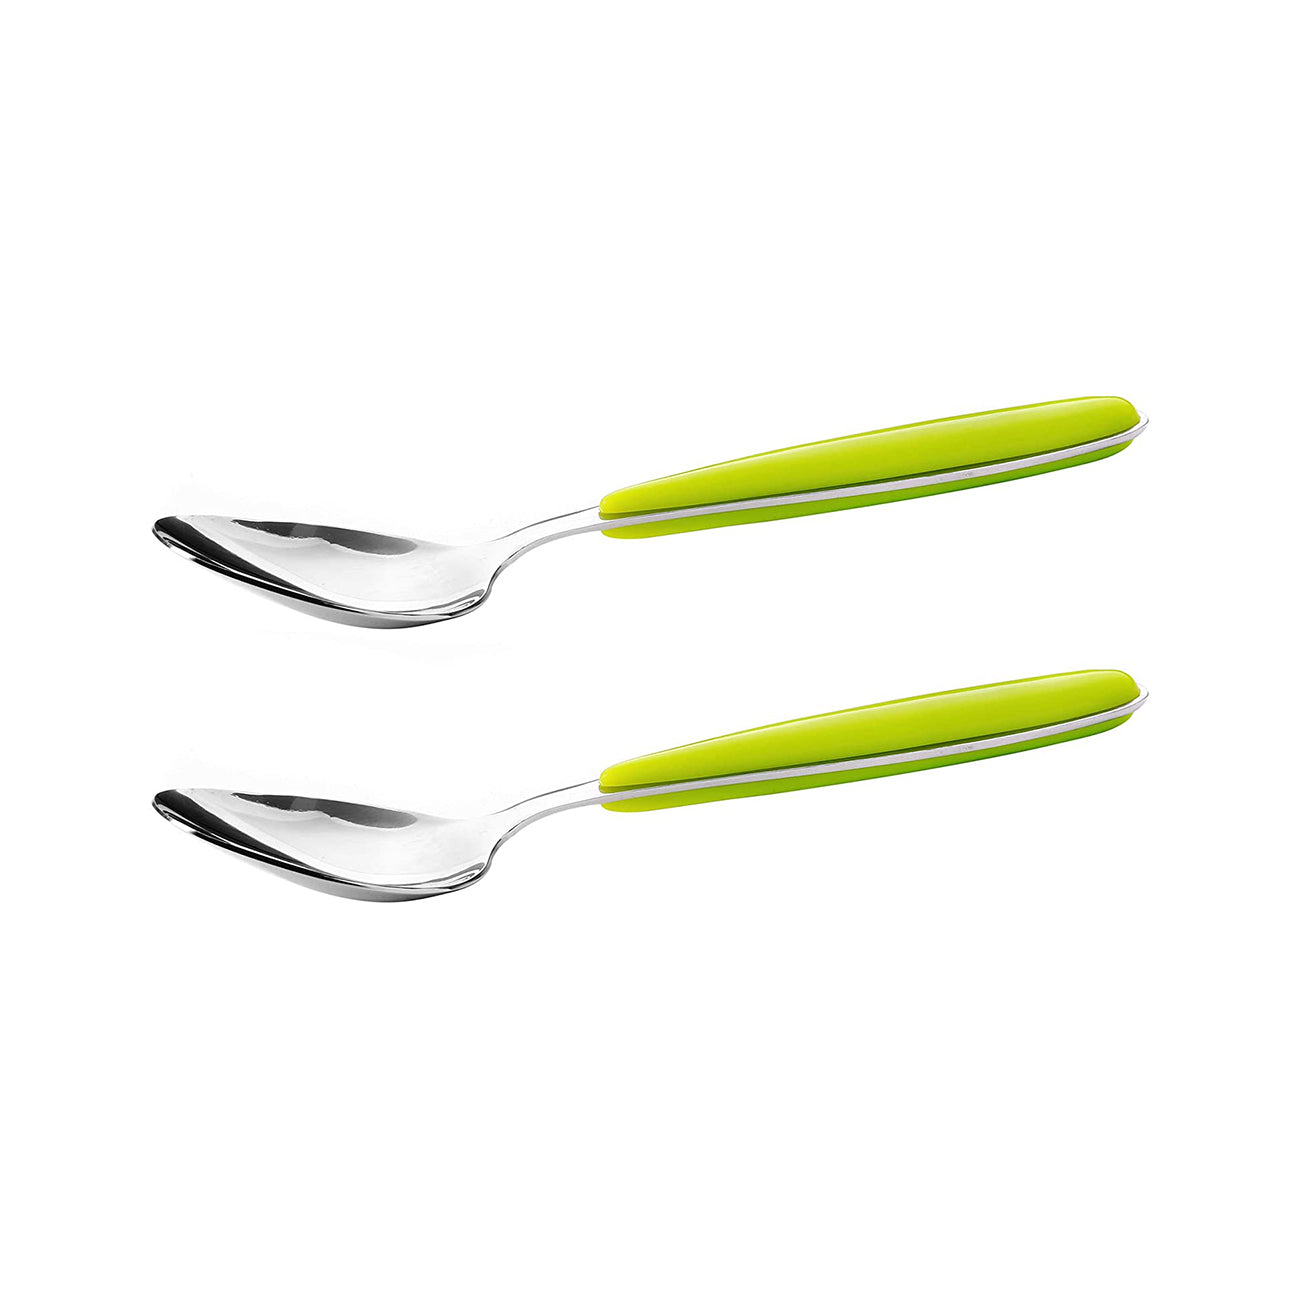 2Pcs Table Spoon - Plain Pattern Cutlery, Dishwasher Safe, Mirror Polished, Ergonomic Handle | Stainless Steel Material | Perfect for Home, Hotel and More (Sliver and Green)